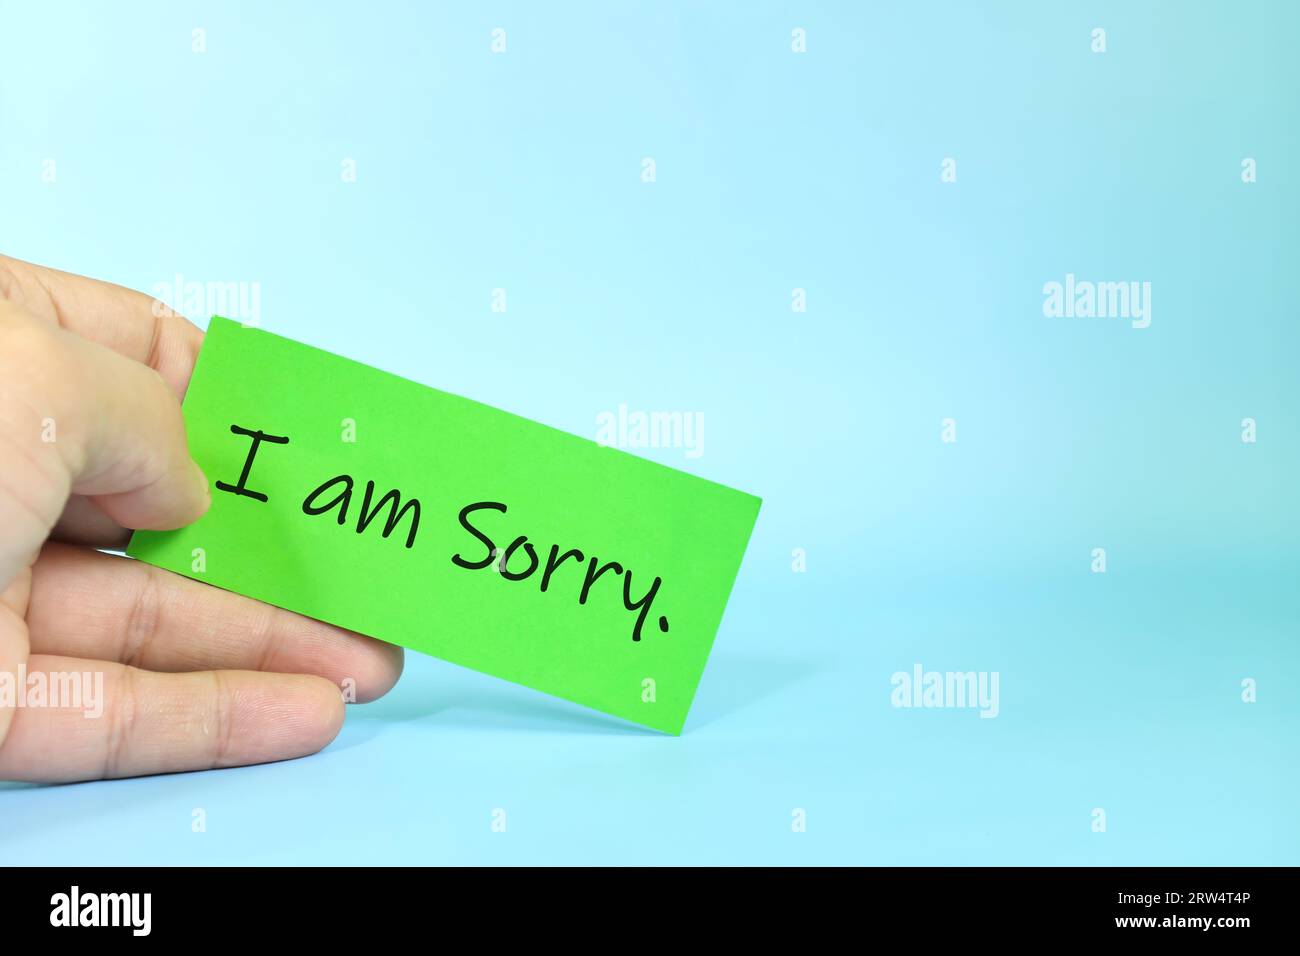 I am sorry message concept. Hand holding a bright yellow paper with written message note Stock Photo